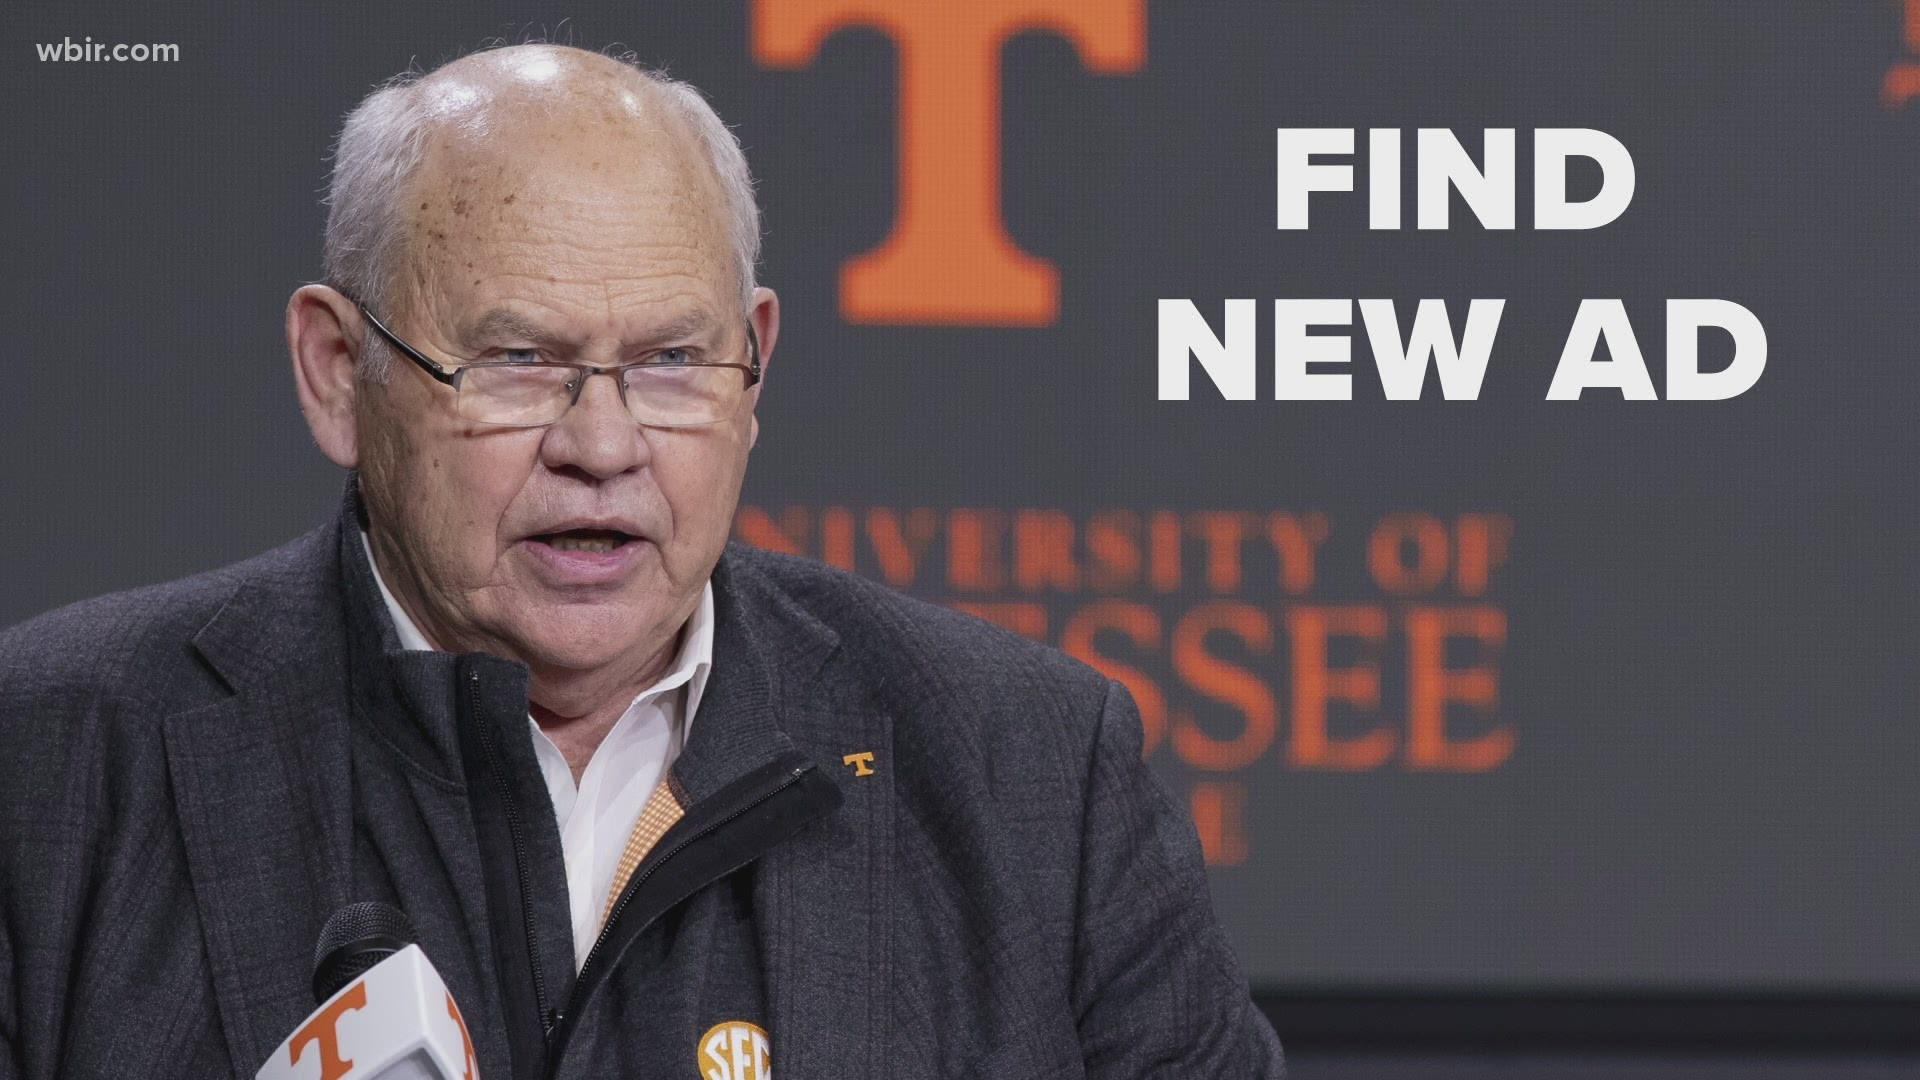 Current AD Phillip Fulmer will stay on and retire following the new hire.